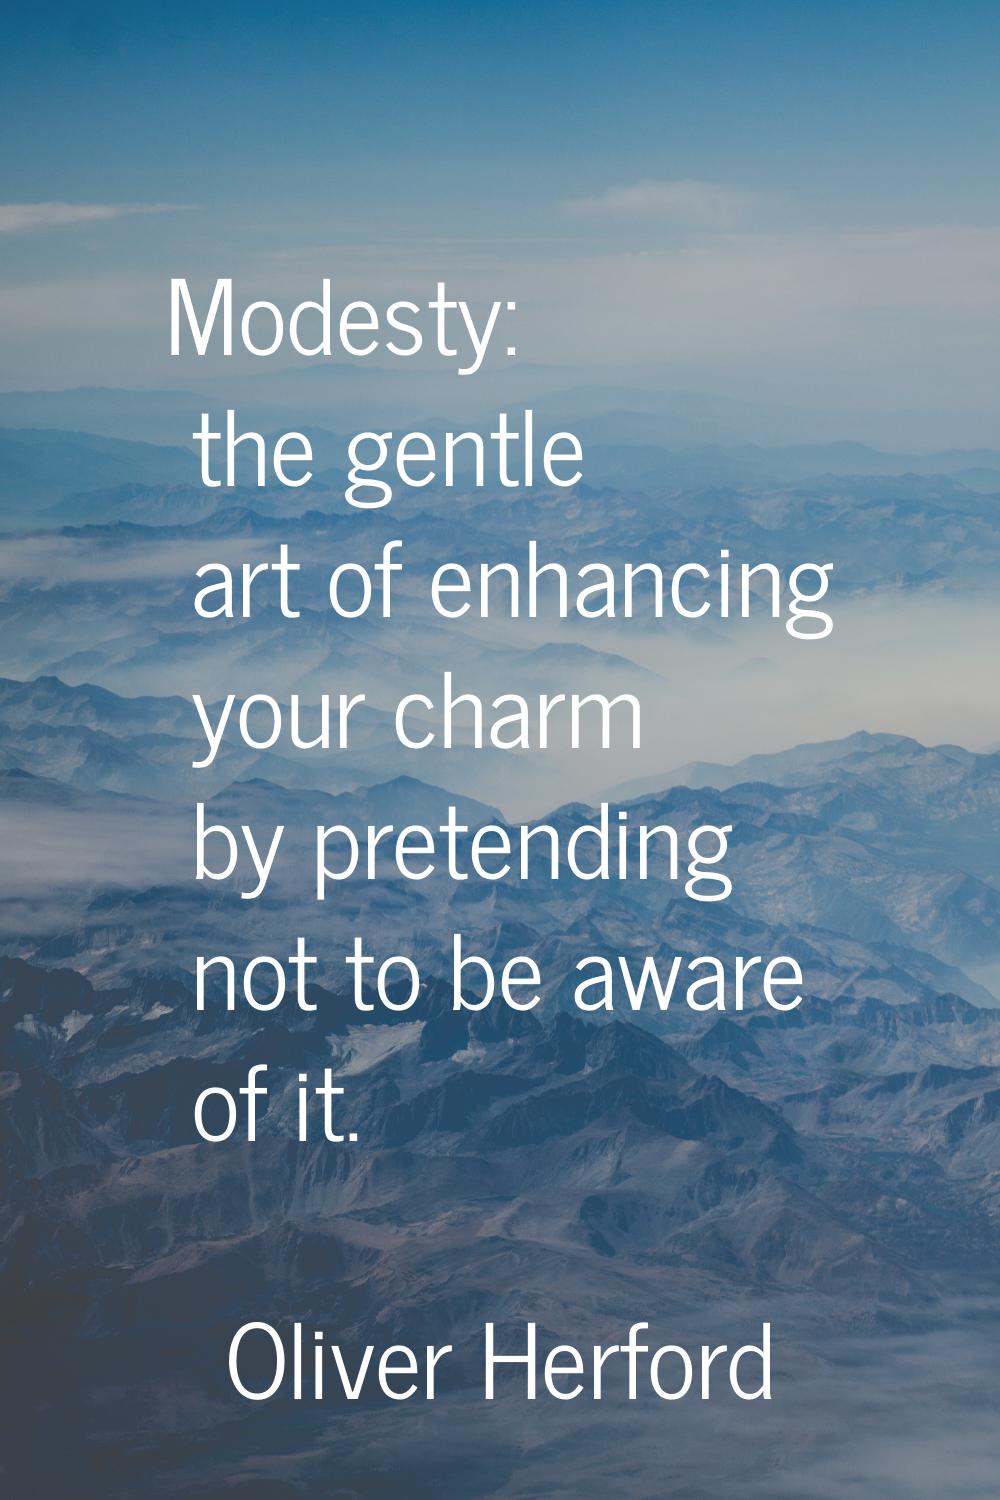 Modesty: the gentle art of enhancing your charm by pretending not to be aware of it.